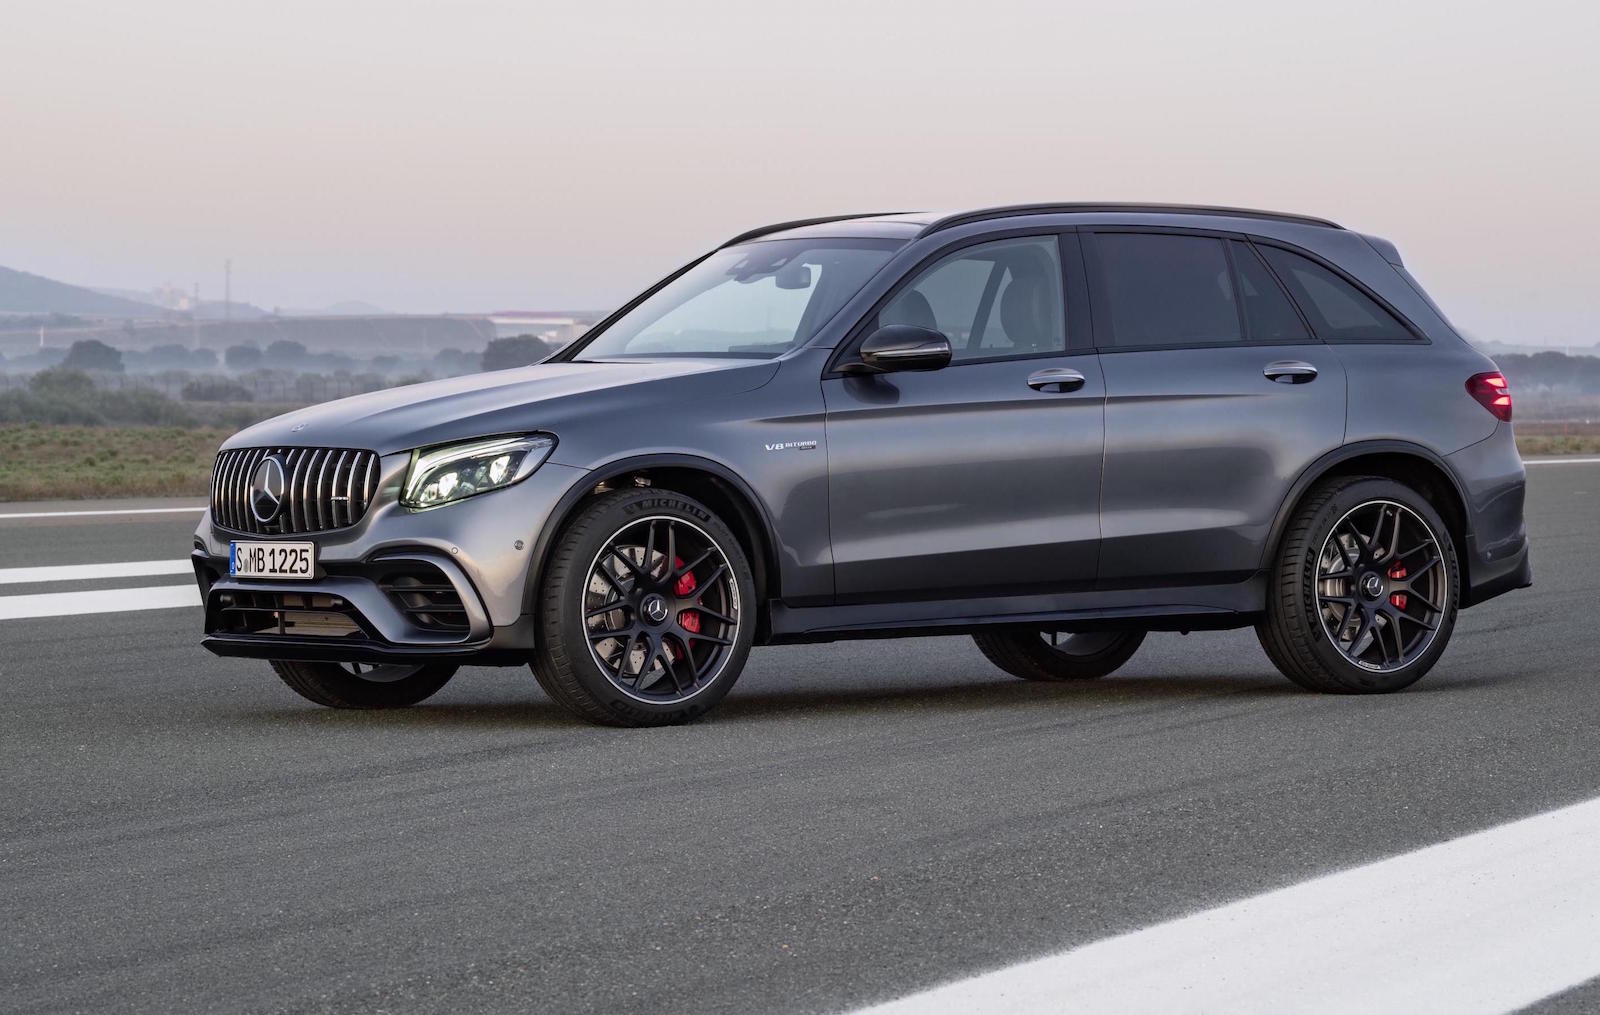 MercedesAMG GLC 63 revealed; most powerful SUV in the class